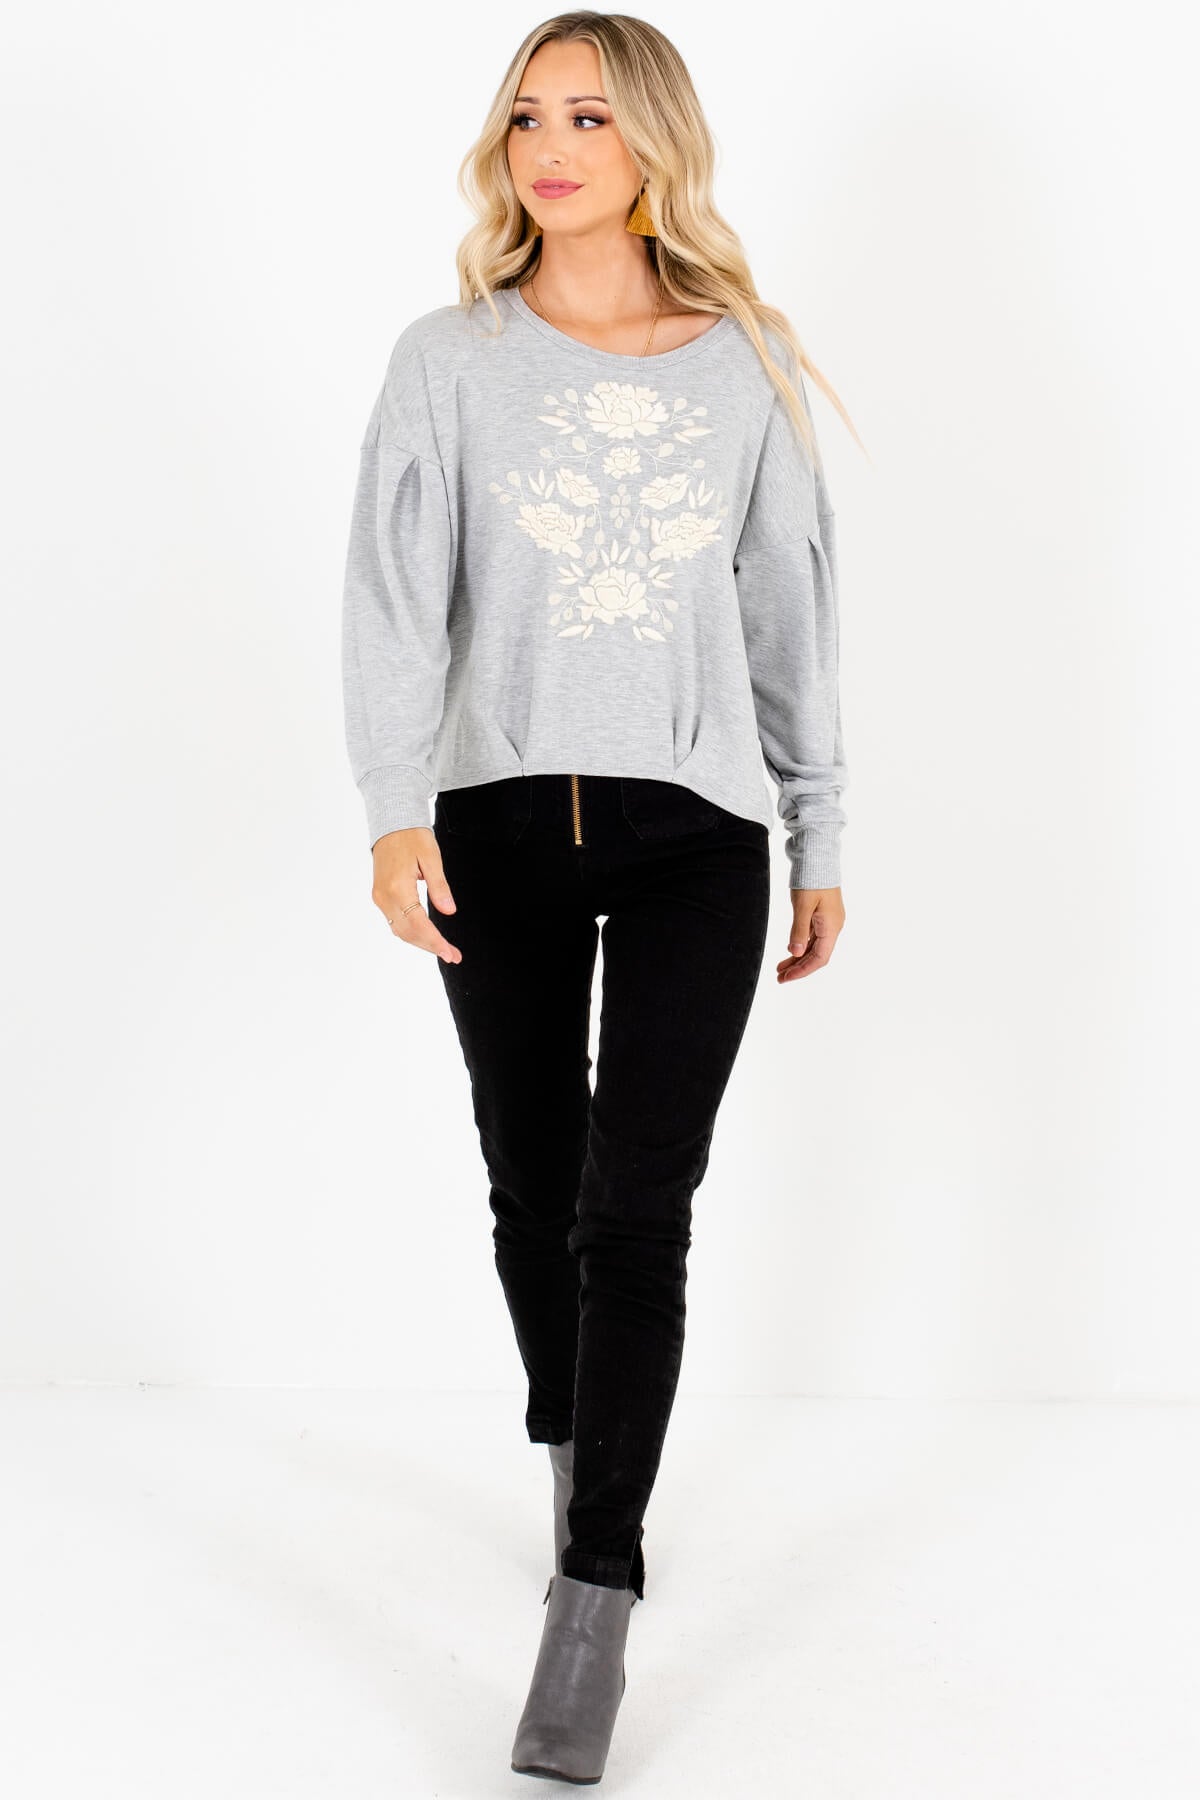 Heather Gray Cute and Comfortable Boutique Pullovers for Women